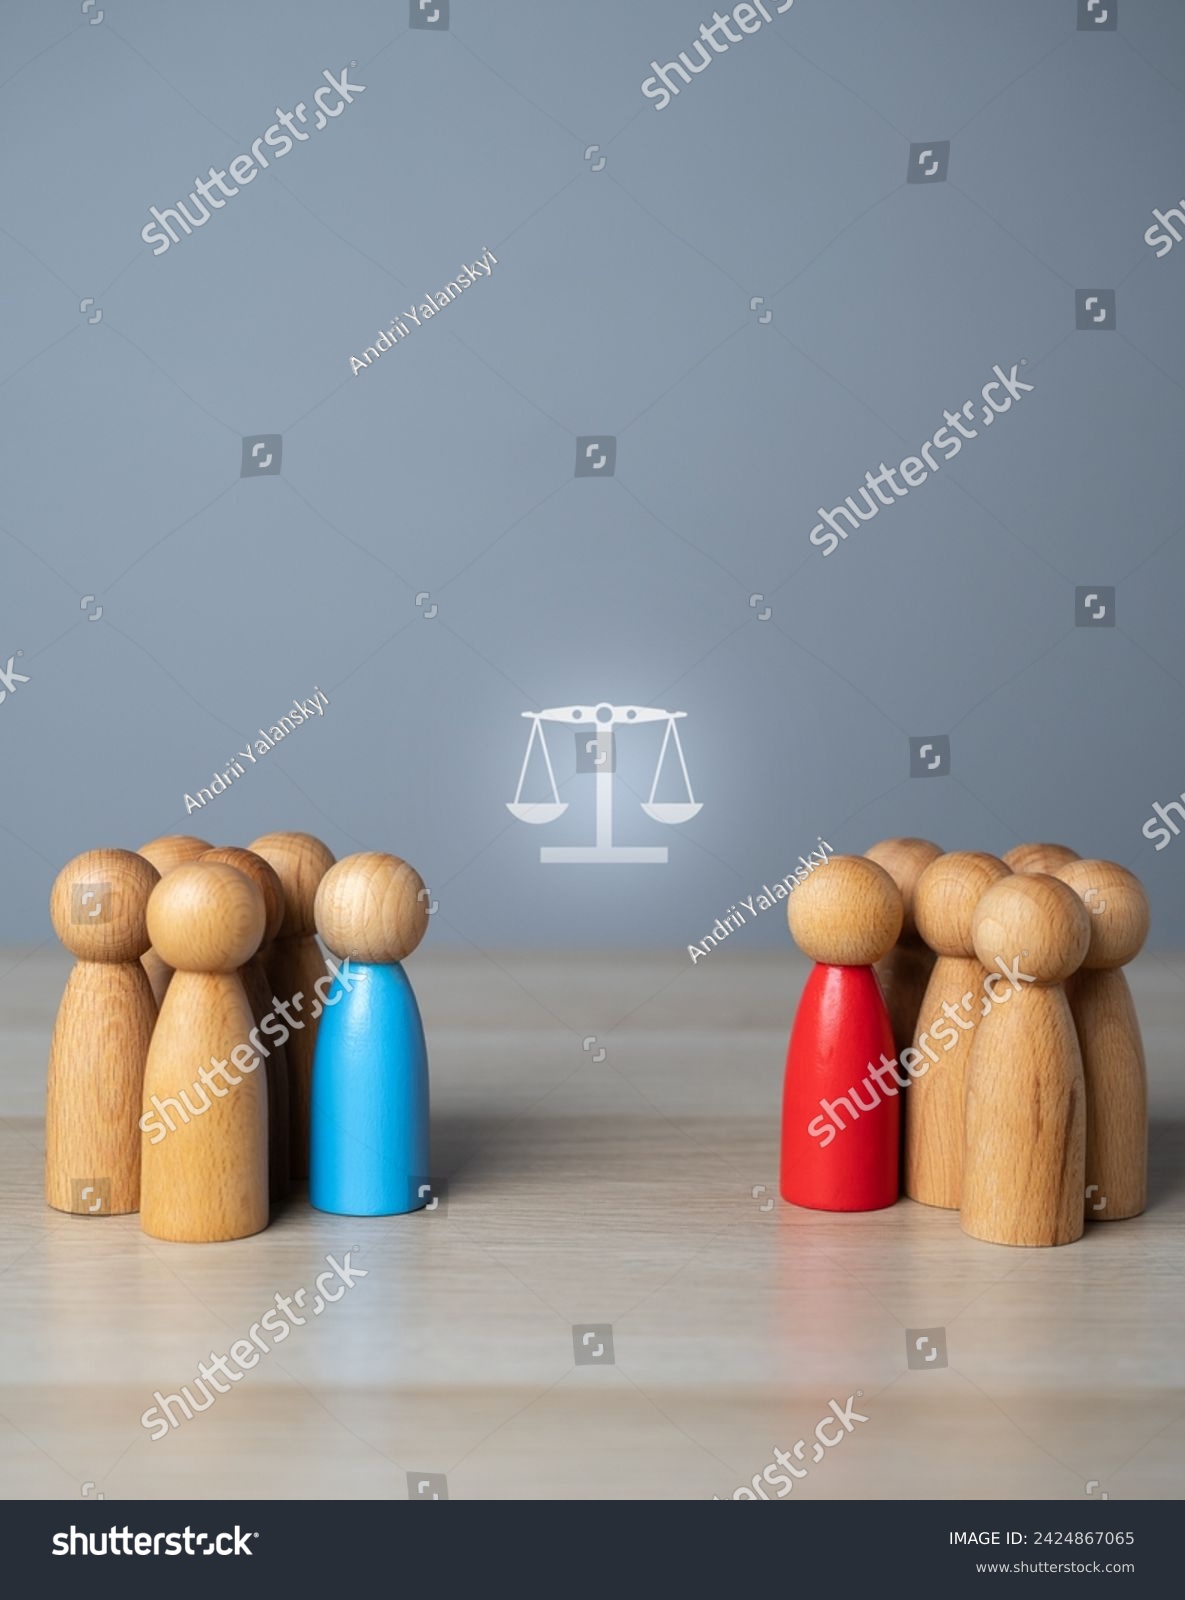 The two opposing groups resolve the dispute through the courts. Conflict resolution through a disinterested independent person. Reach a compromise. Negotiations and bidding. #2424867065